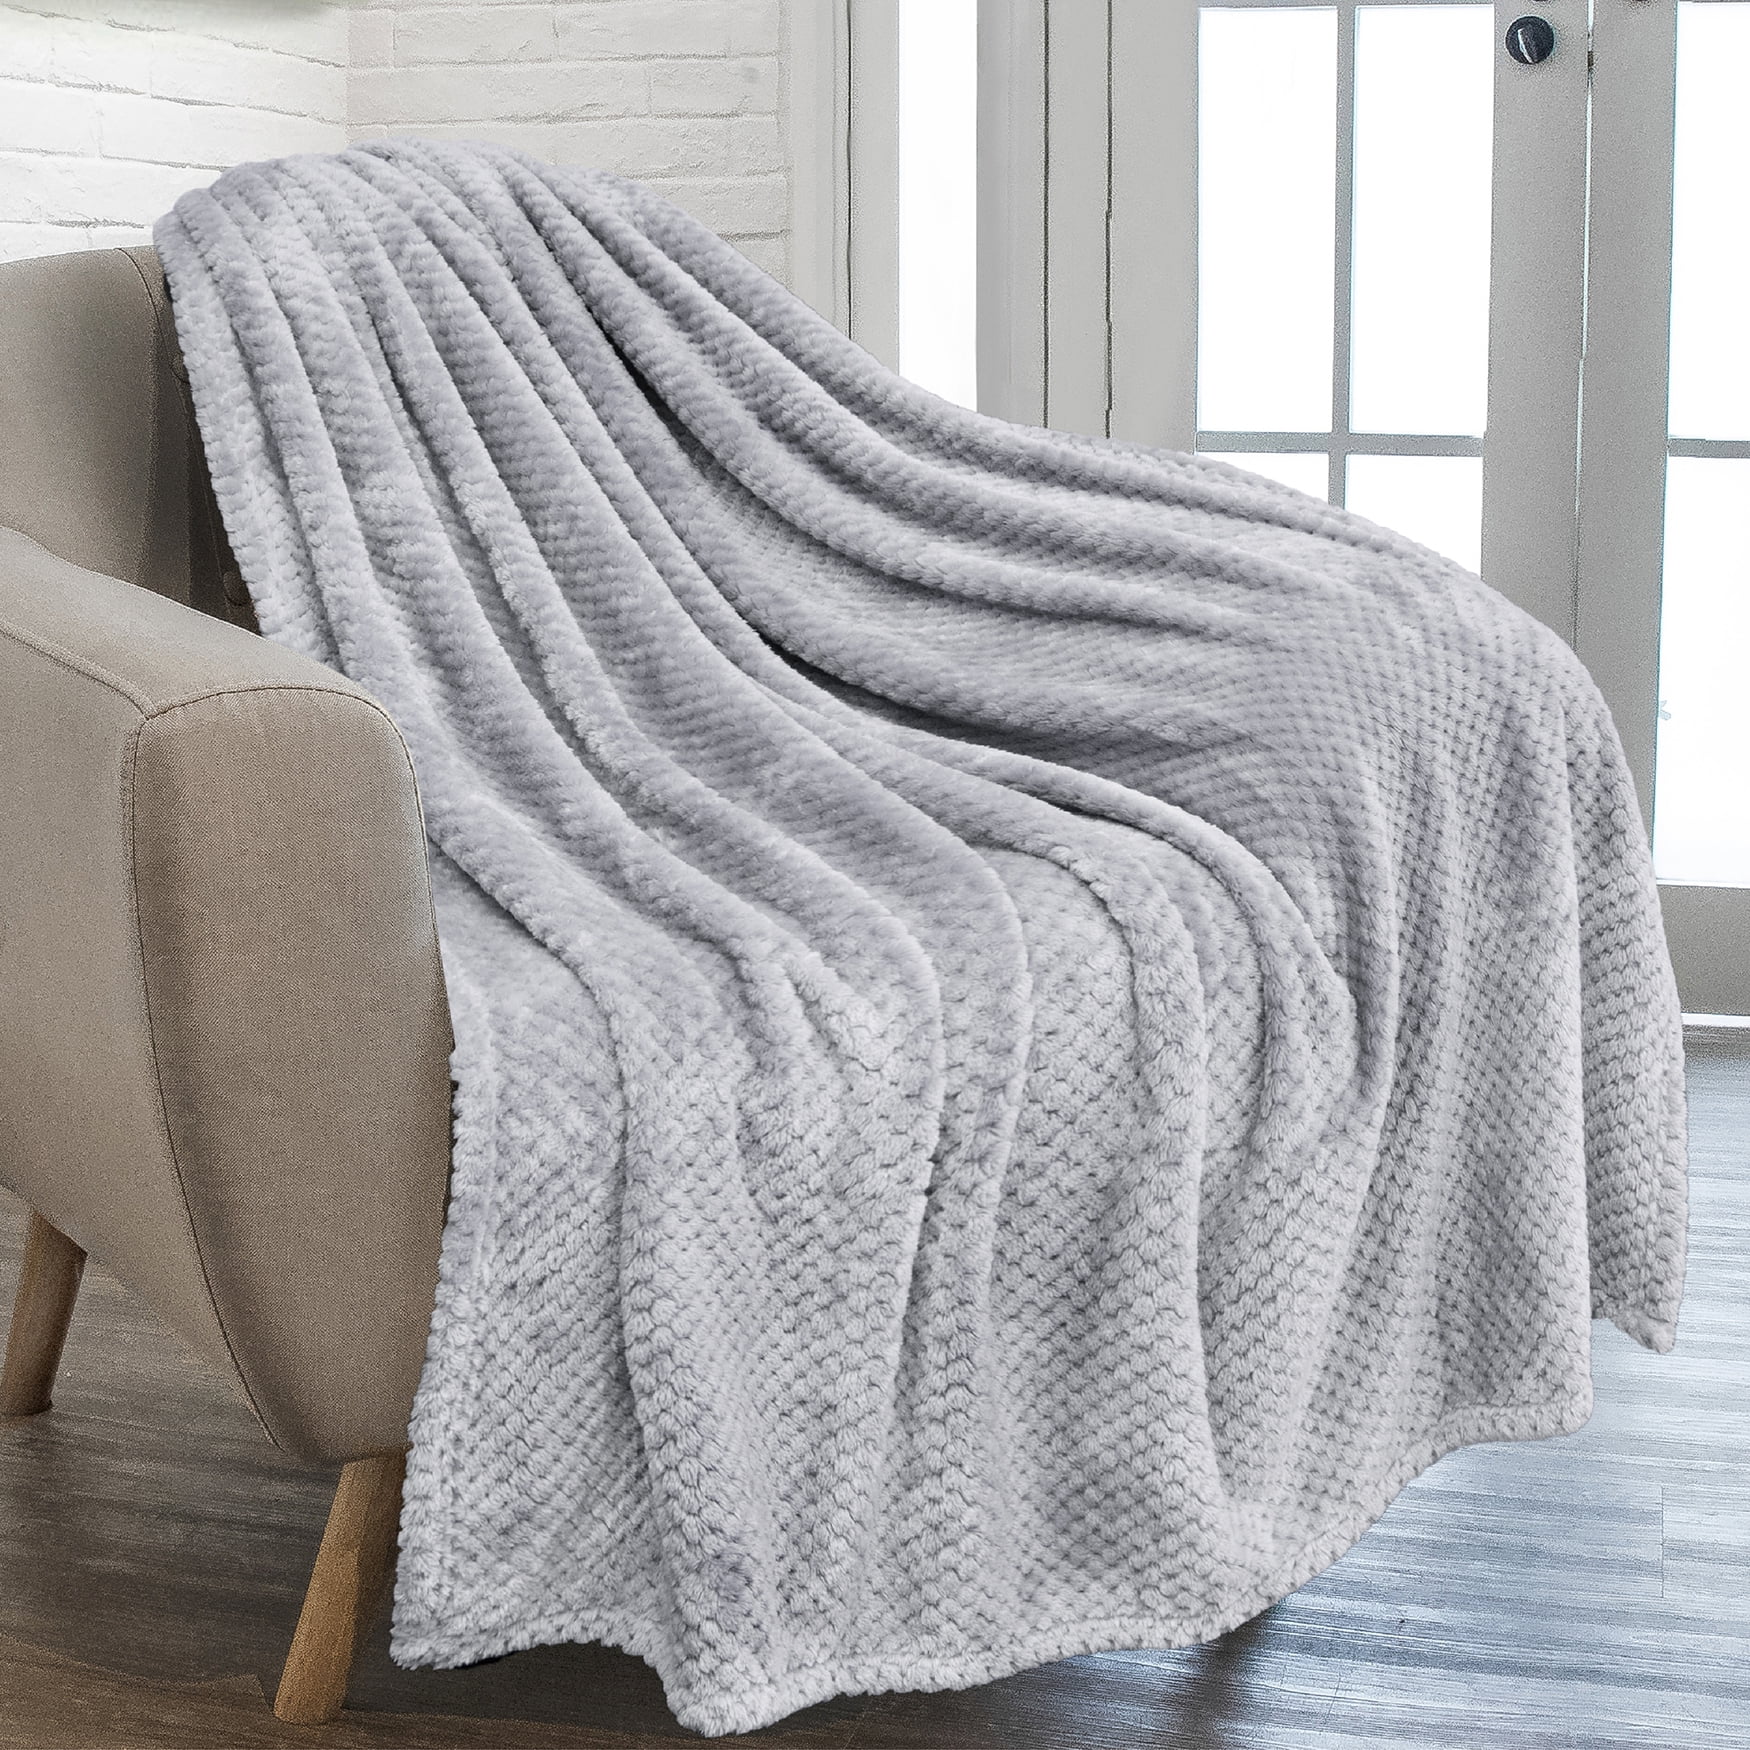 ,White Soft Throw Blanket,Wheat Spike Jacquard Coral Fleece Blanket Soft Lightweight Decorative Throw Blanket for Sofa Couch Bed and Living Room 50 X 63 Inch All Seasons 